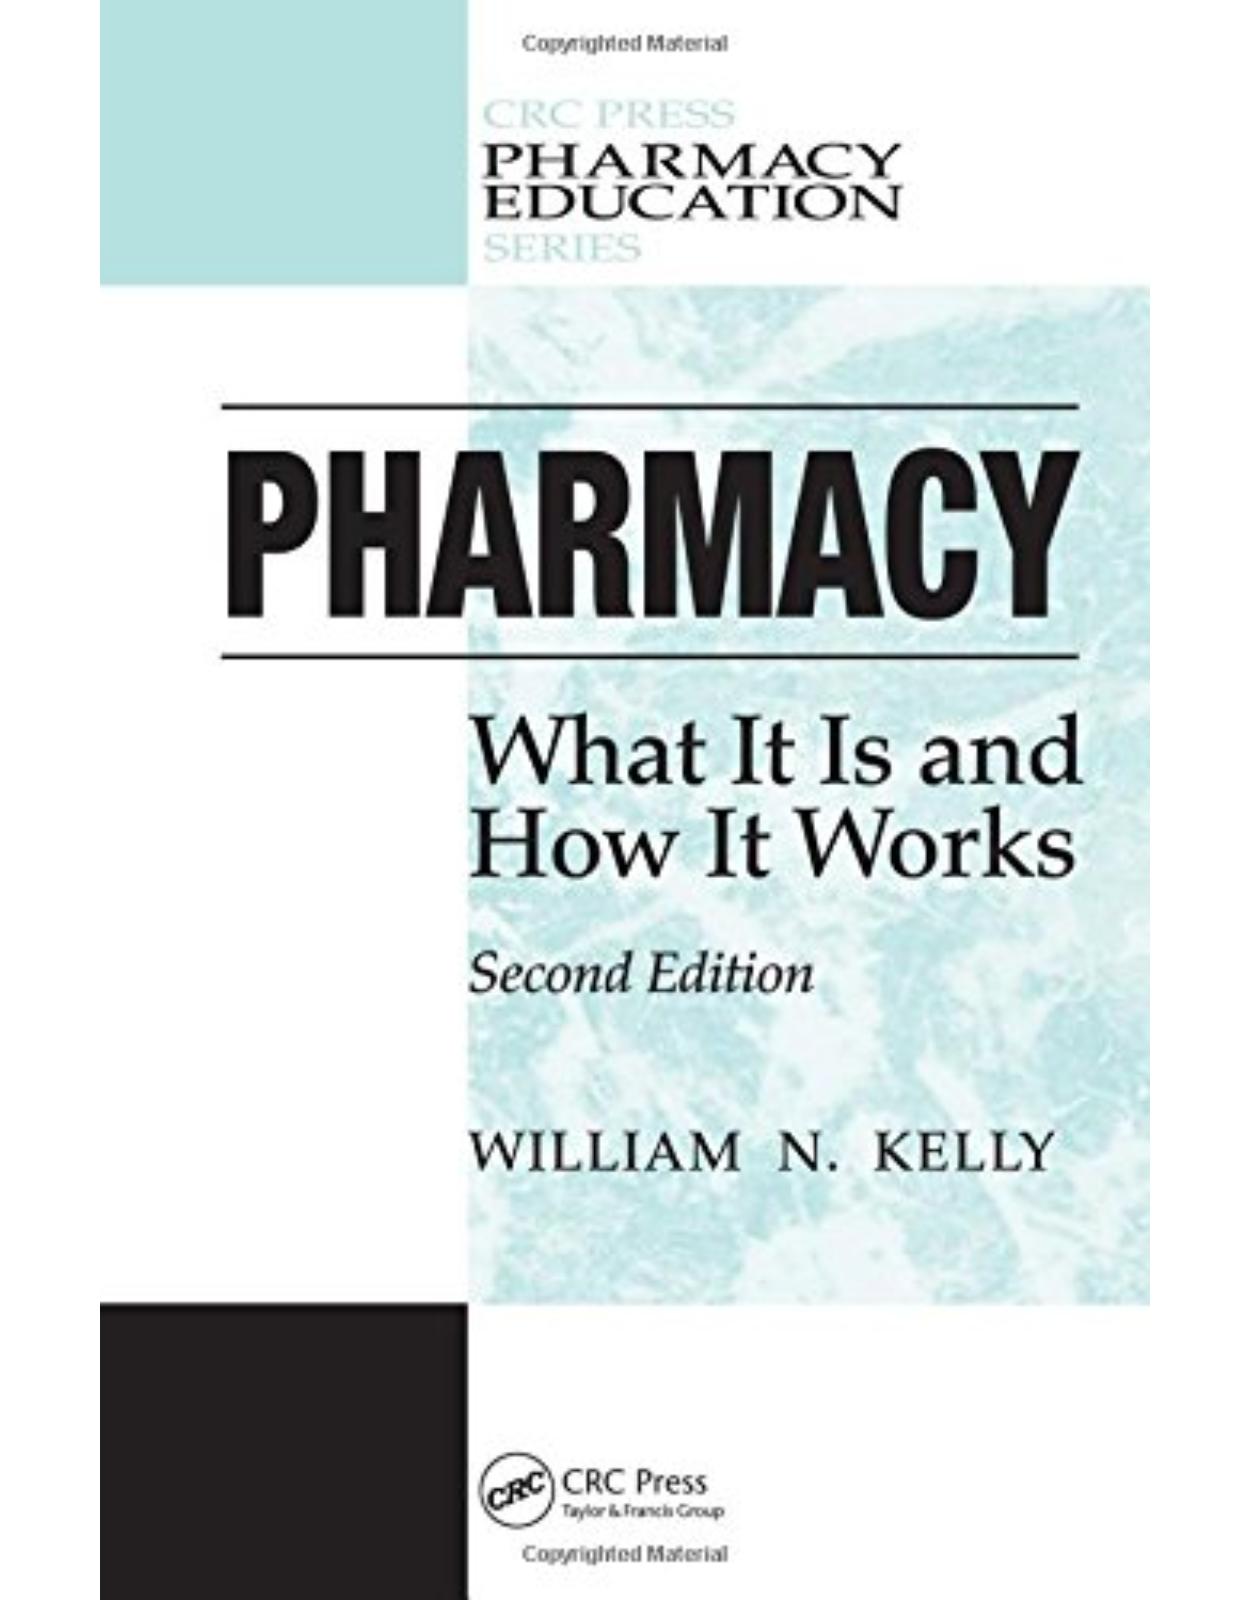 Pharmacy: What it is and how it works